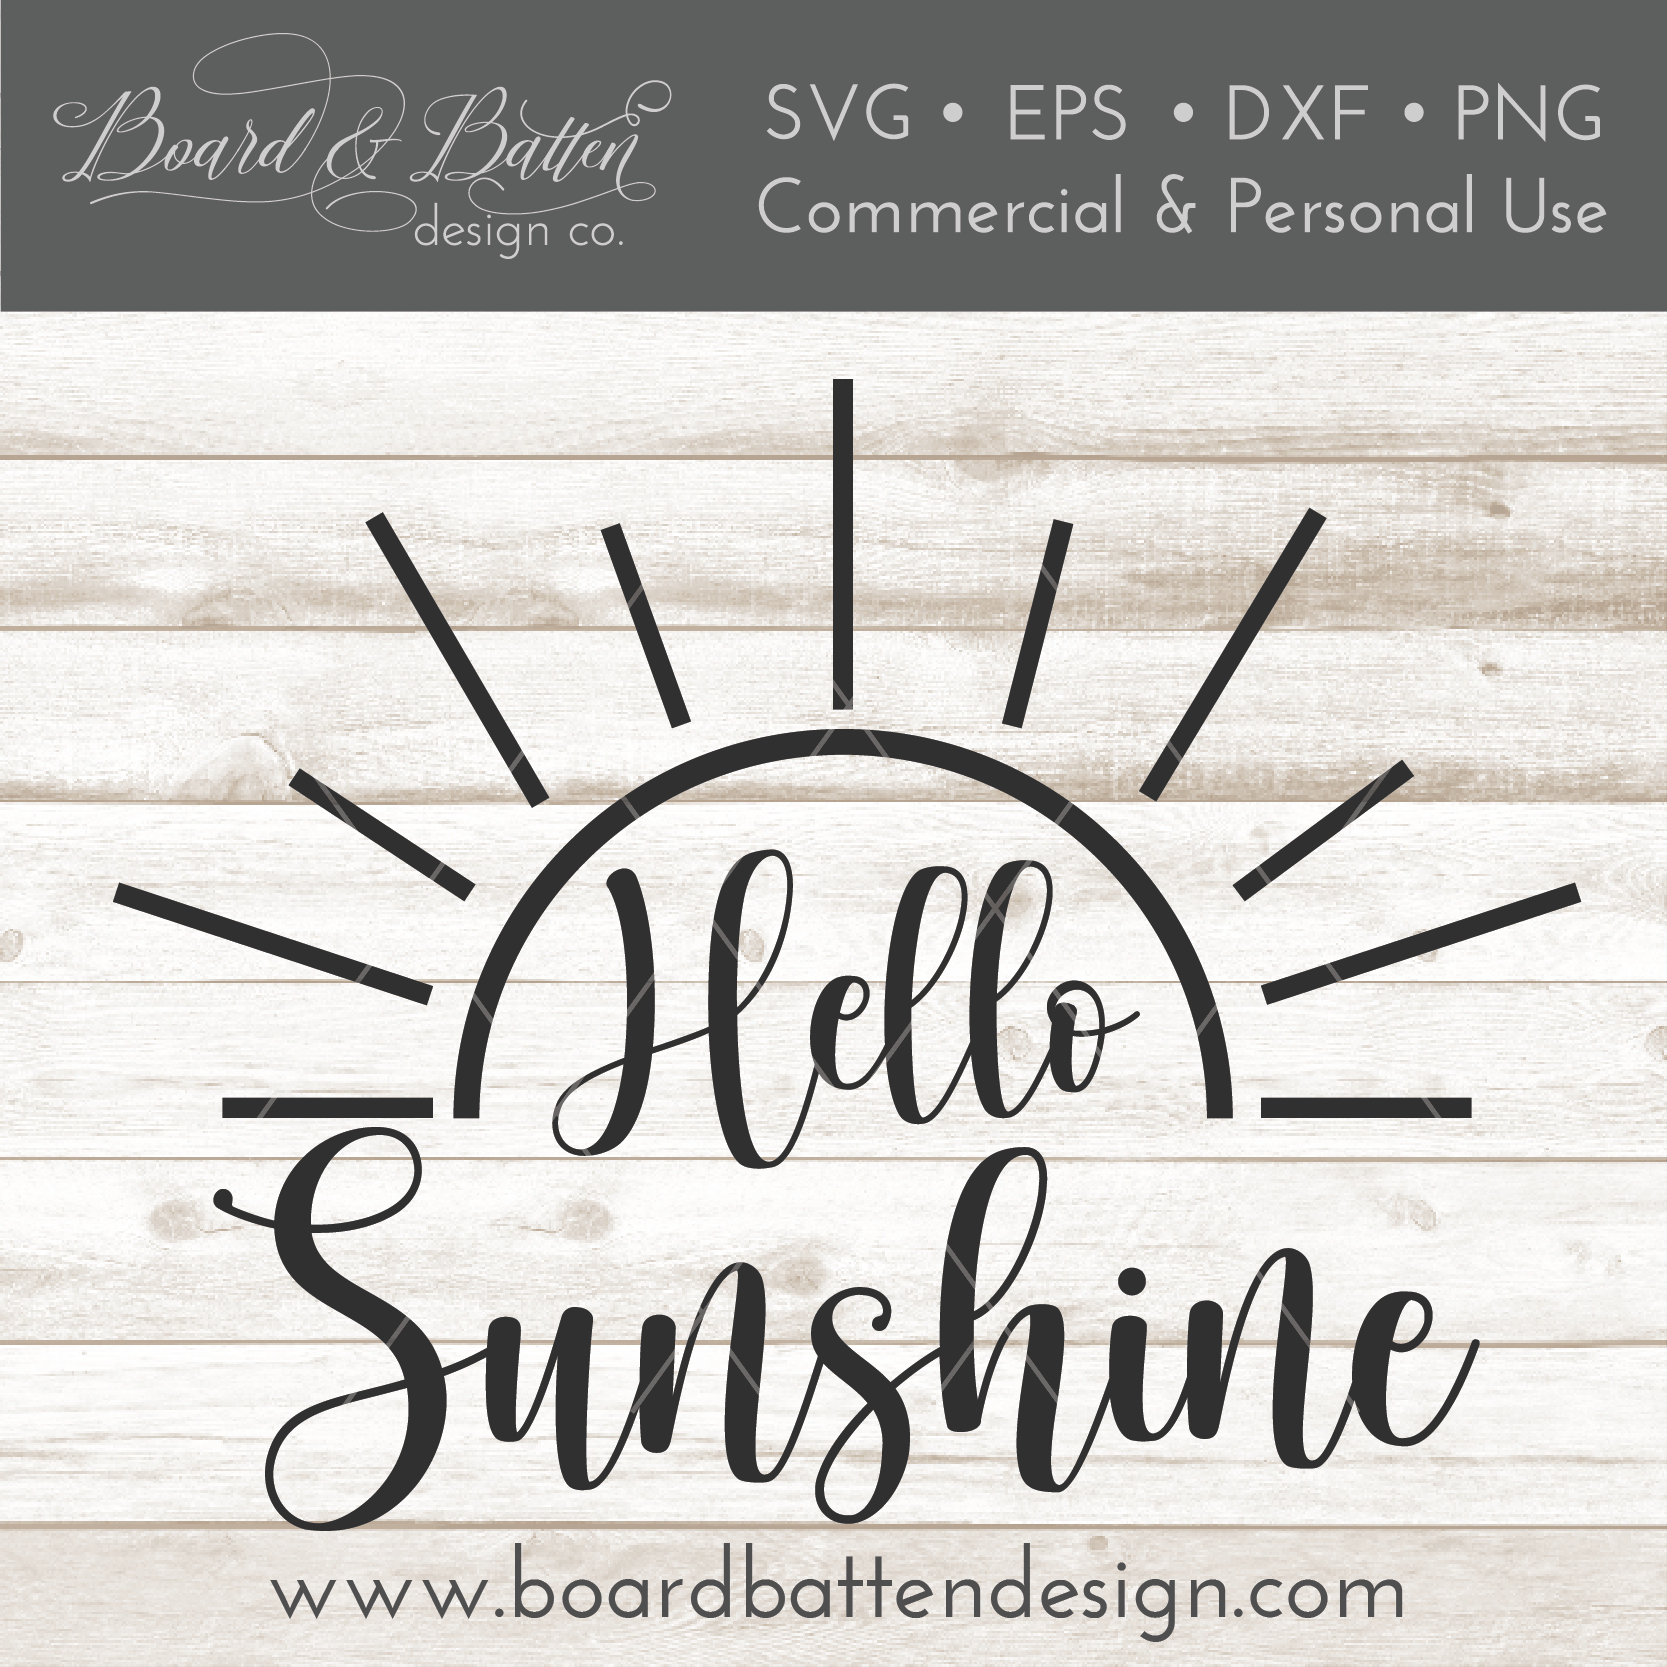 Hello Sunshine 2 SVG File for Summer - Commercial Use SVG Files for Cricut & Silhouette